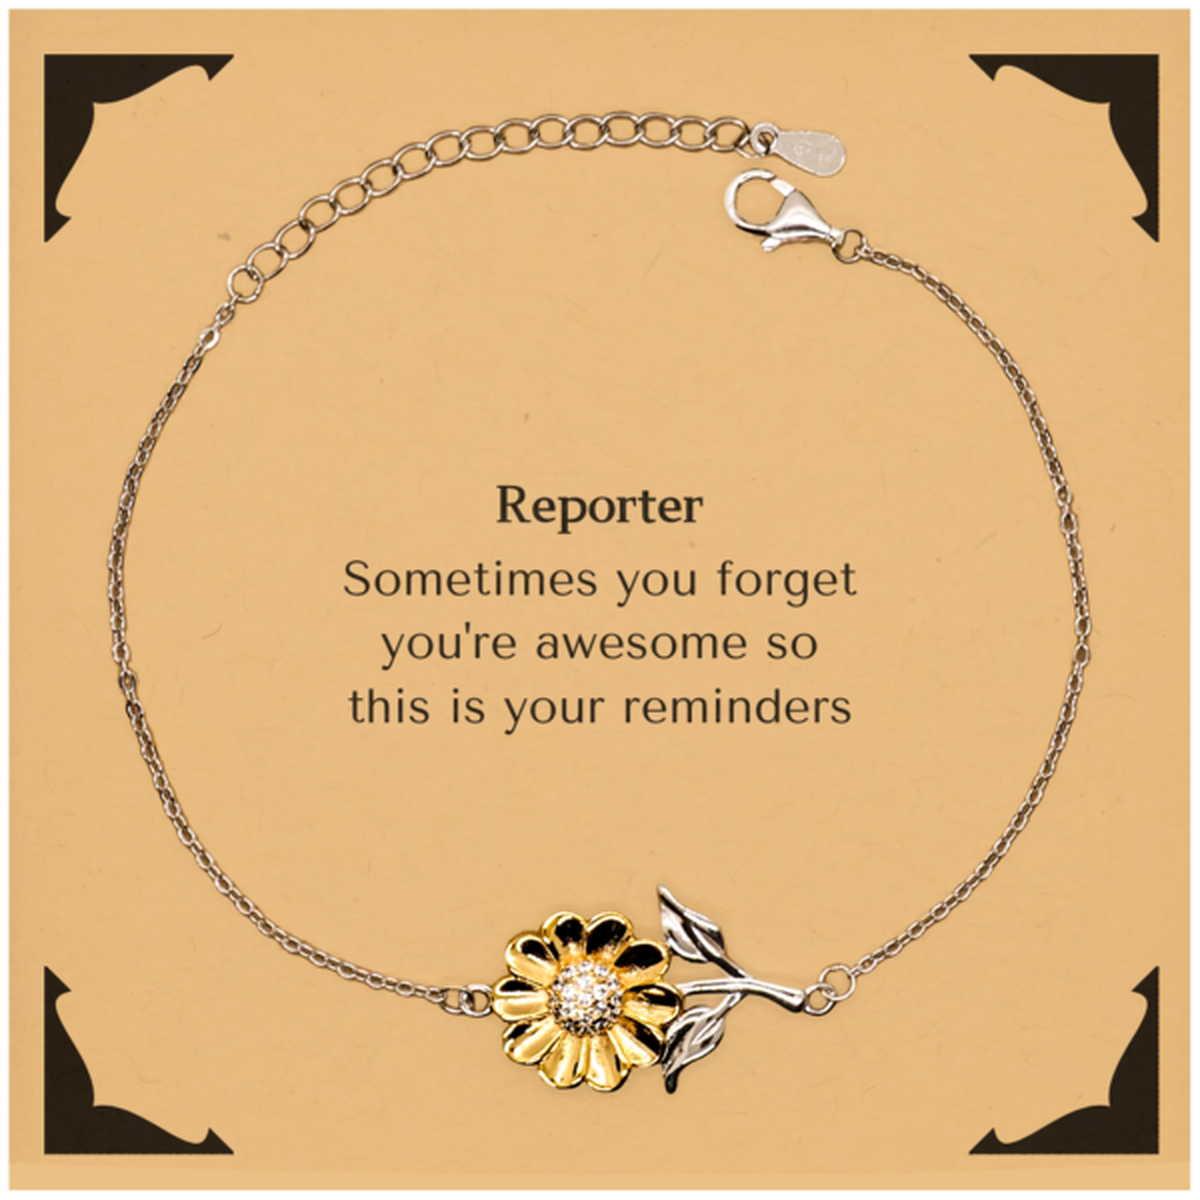 Sentimental Reporter Sunflower Bracelet, Reporter Sometimes you forget you're awesome so this is your reminders, Graduation Christmas Birthday Gifts for Reporter, Men, Women, Coworkers